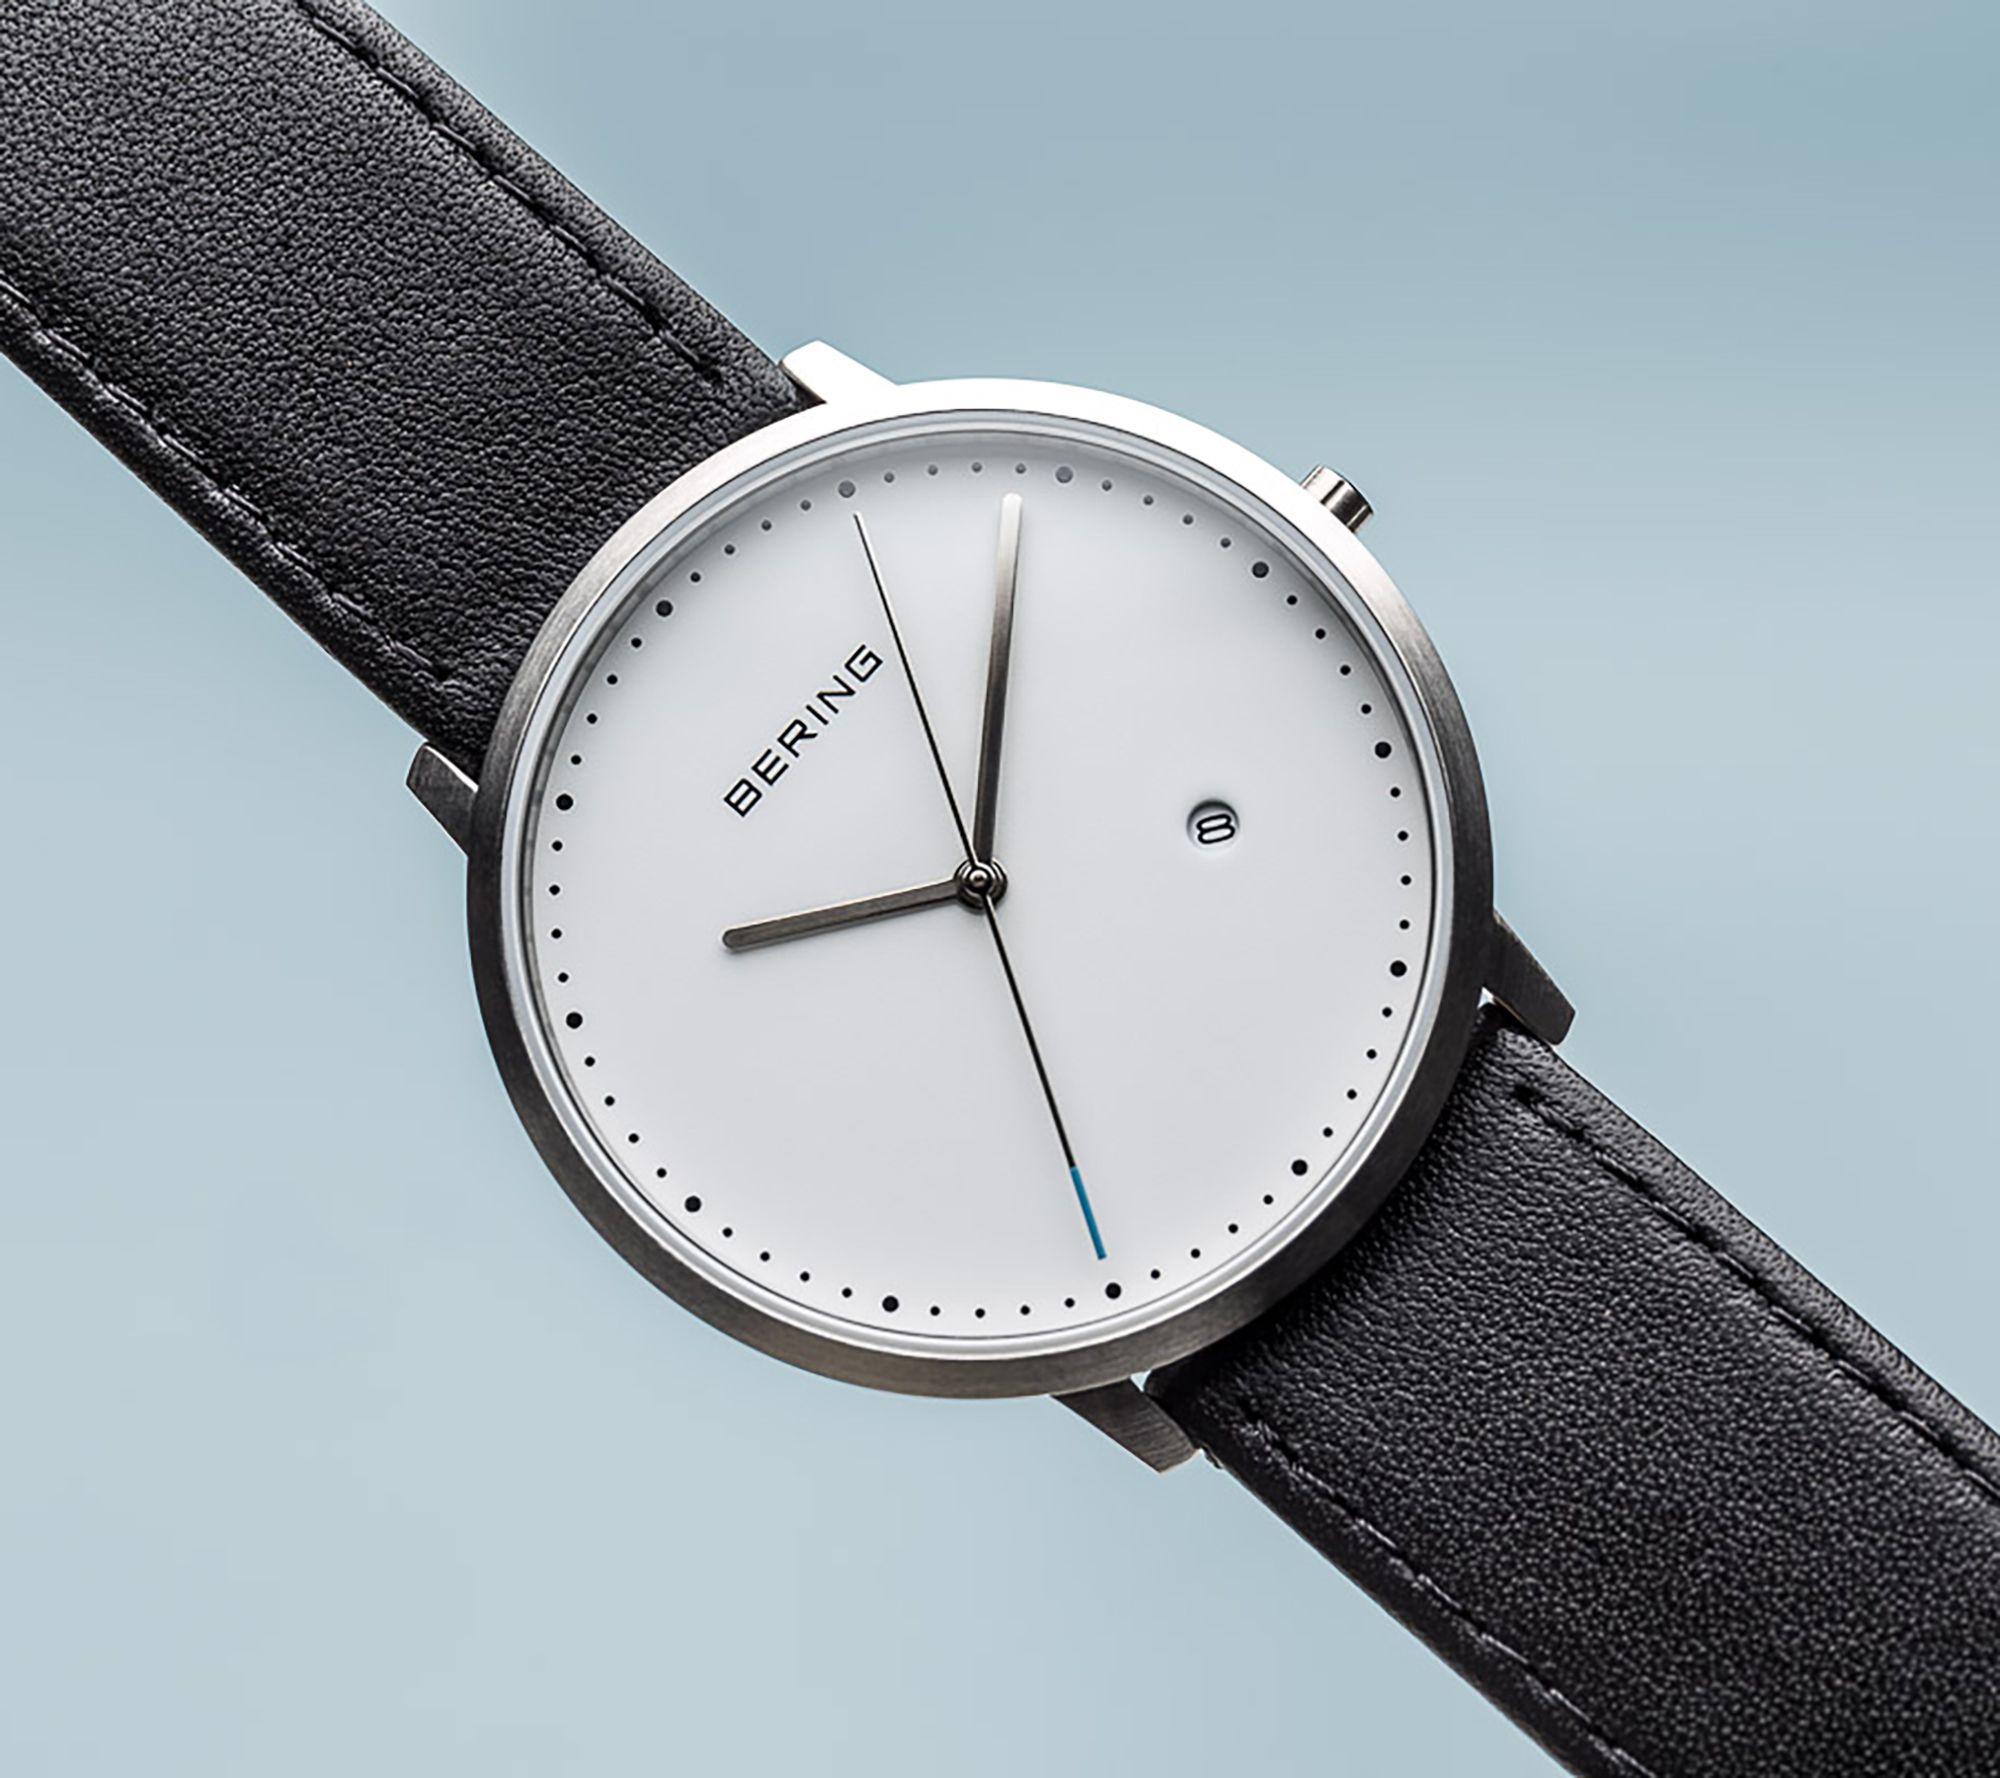 Bering Unisex White Dial Leather Strap Watch - QVC.com